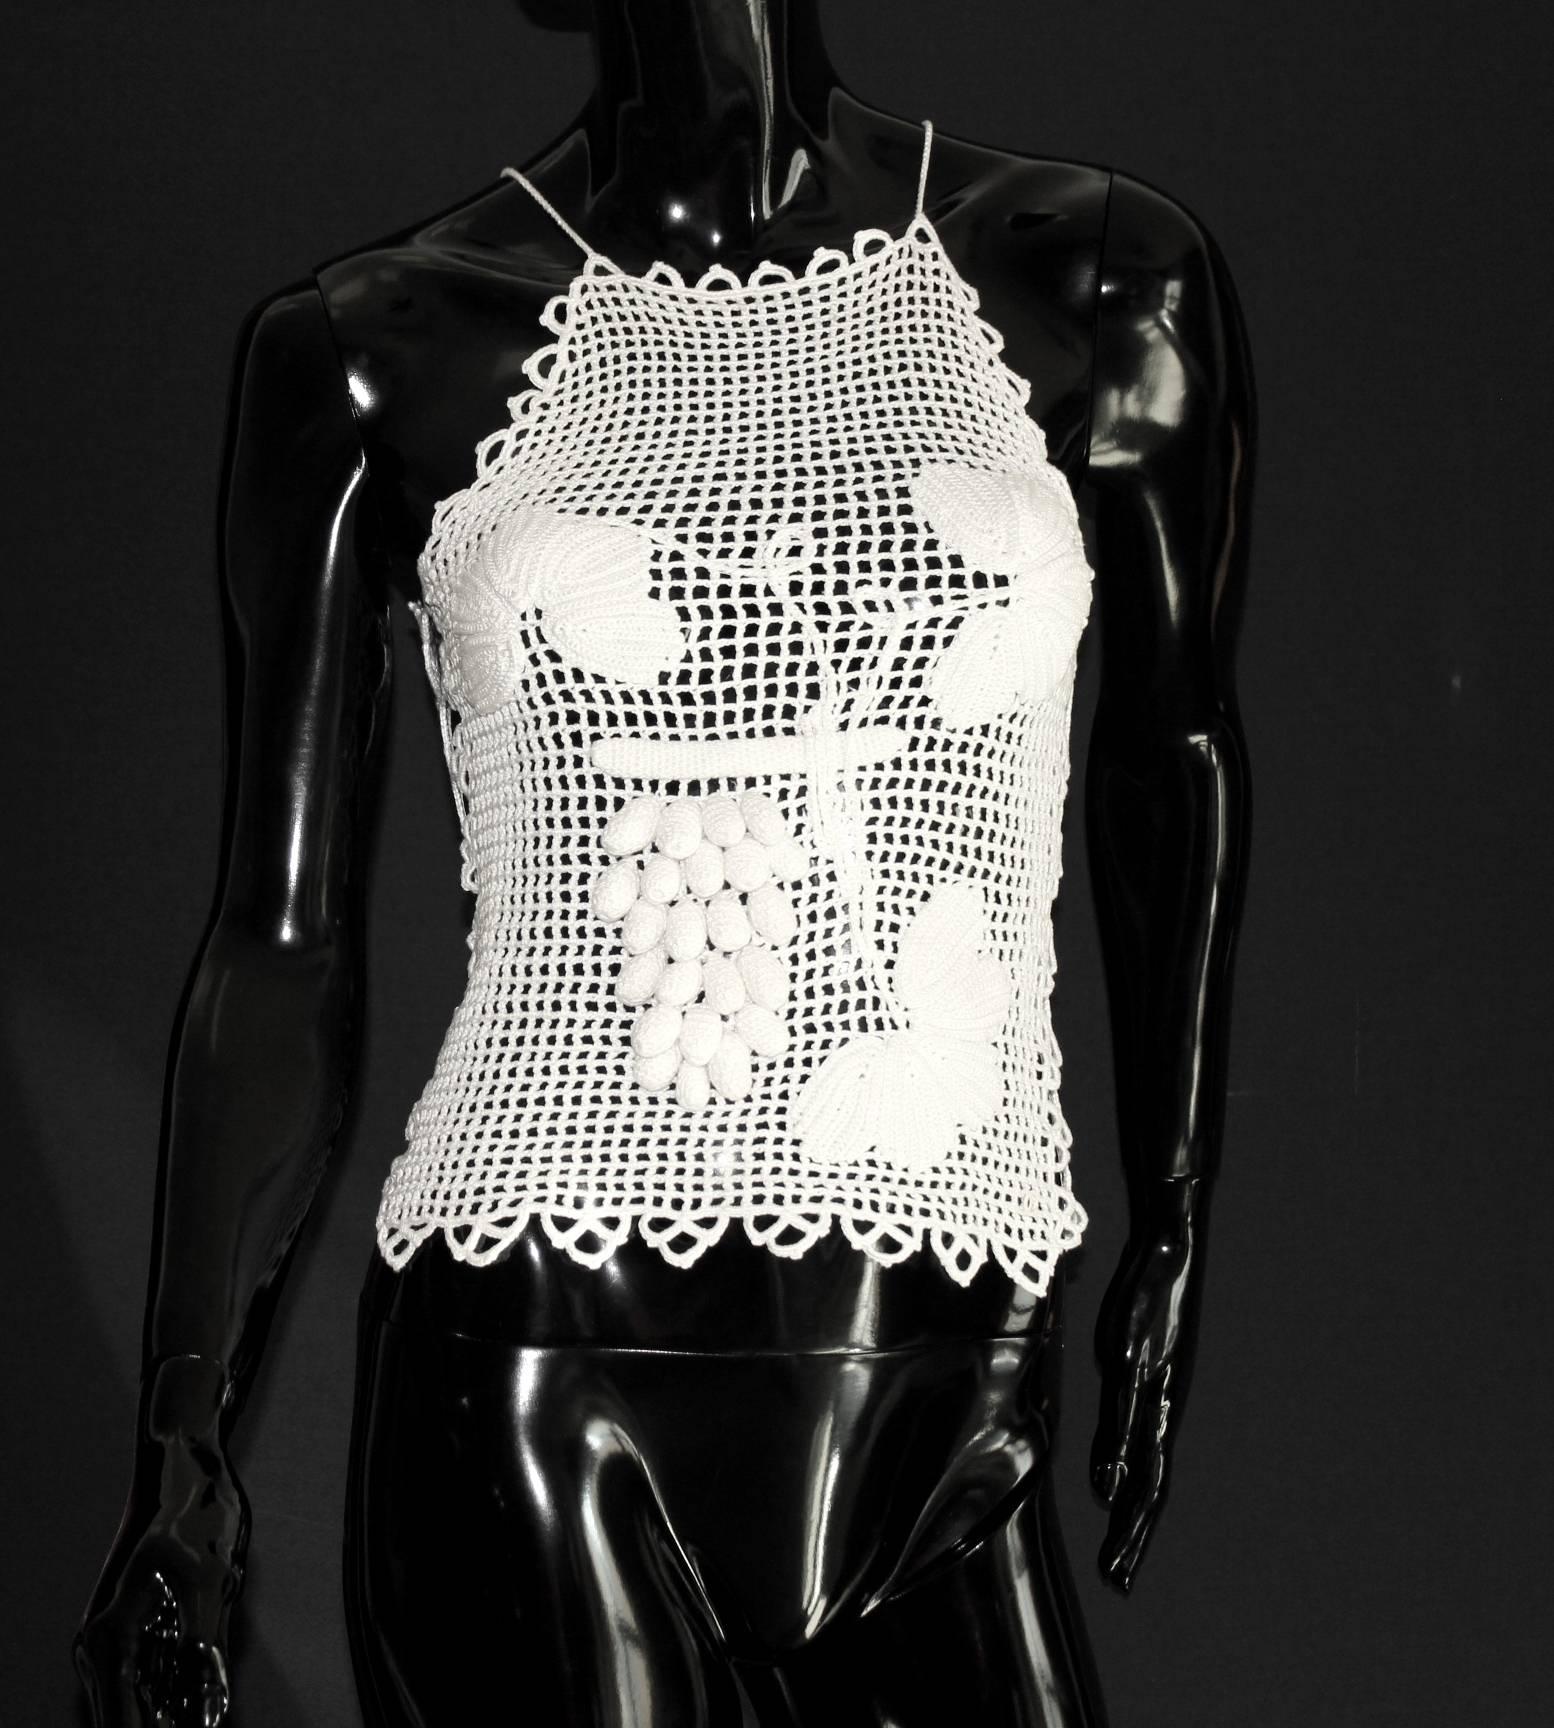 White Chanel 3D Crochet Couture Knit Top

    A couture-like piece by CHANEL
    Fine Crochet Knit with 3D application
    Sexy cut outs on side
    Extremely rare to find
    Prisine condition
    Made in France
